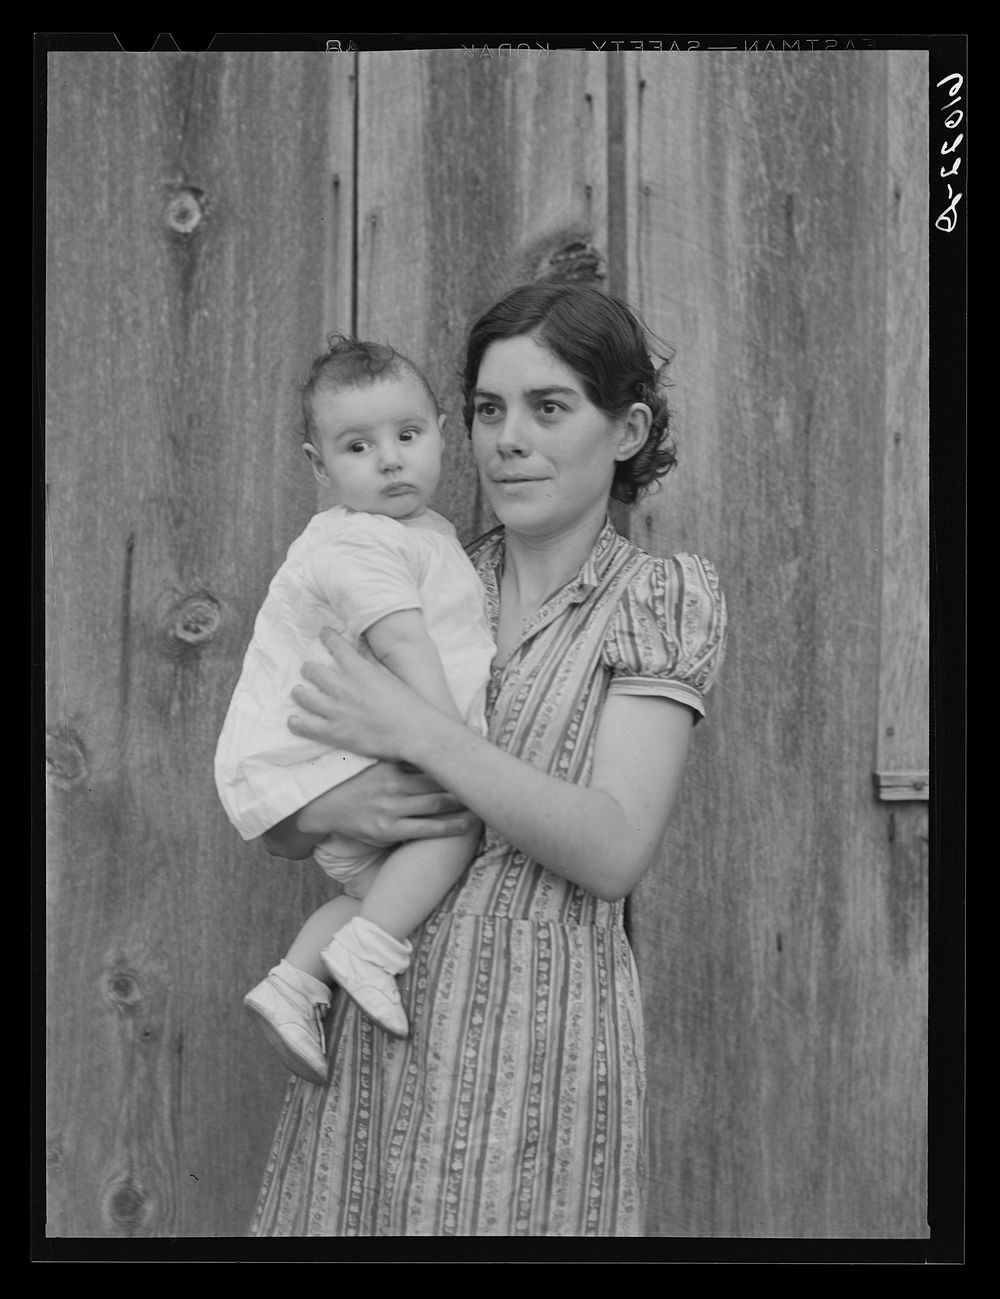 Mother and child living on Ozark Mountain farm, Missouri. Sourced from the Library of Congress.